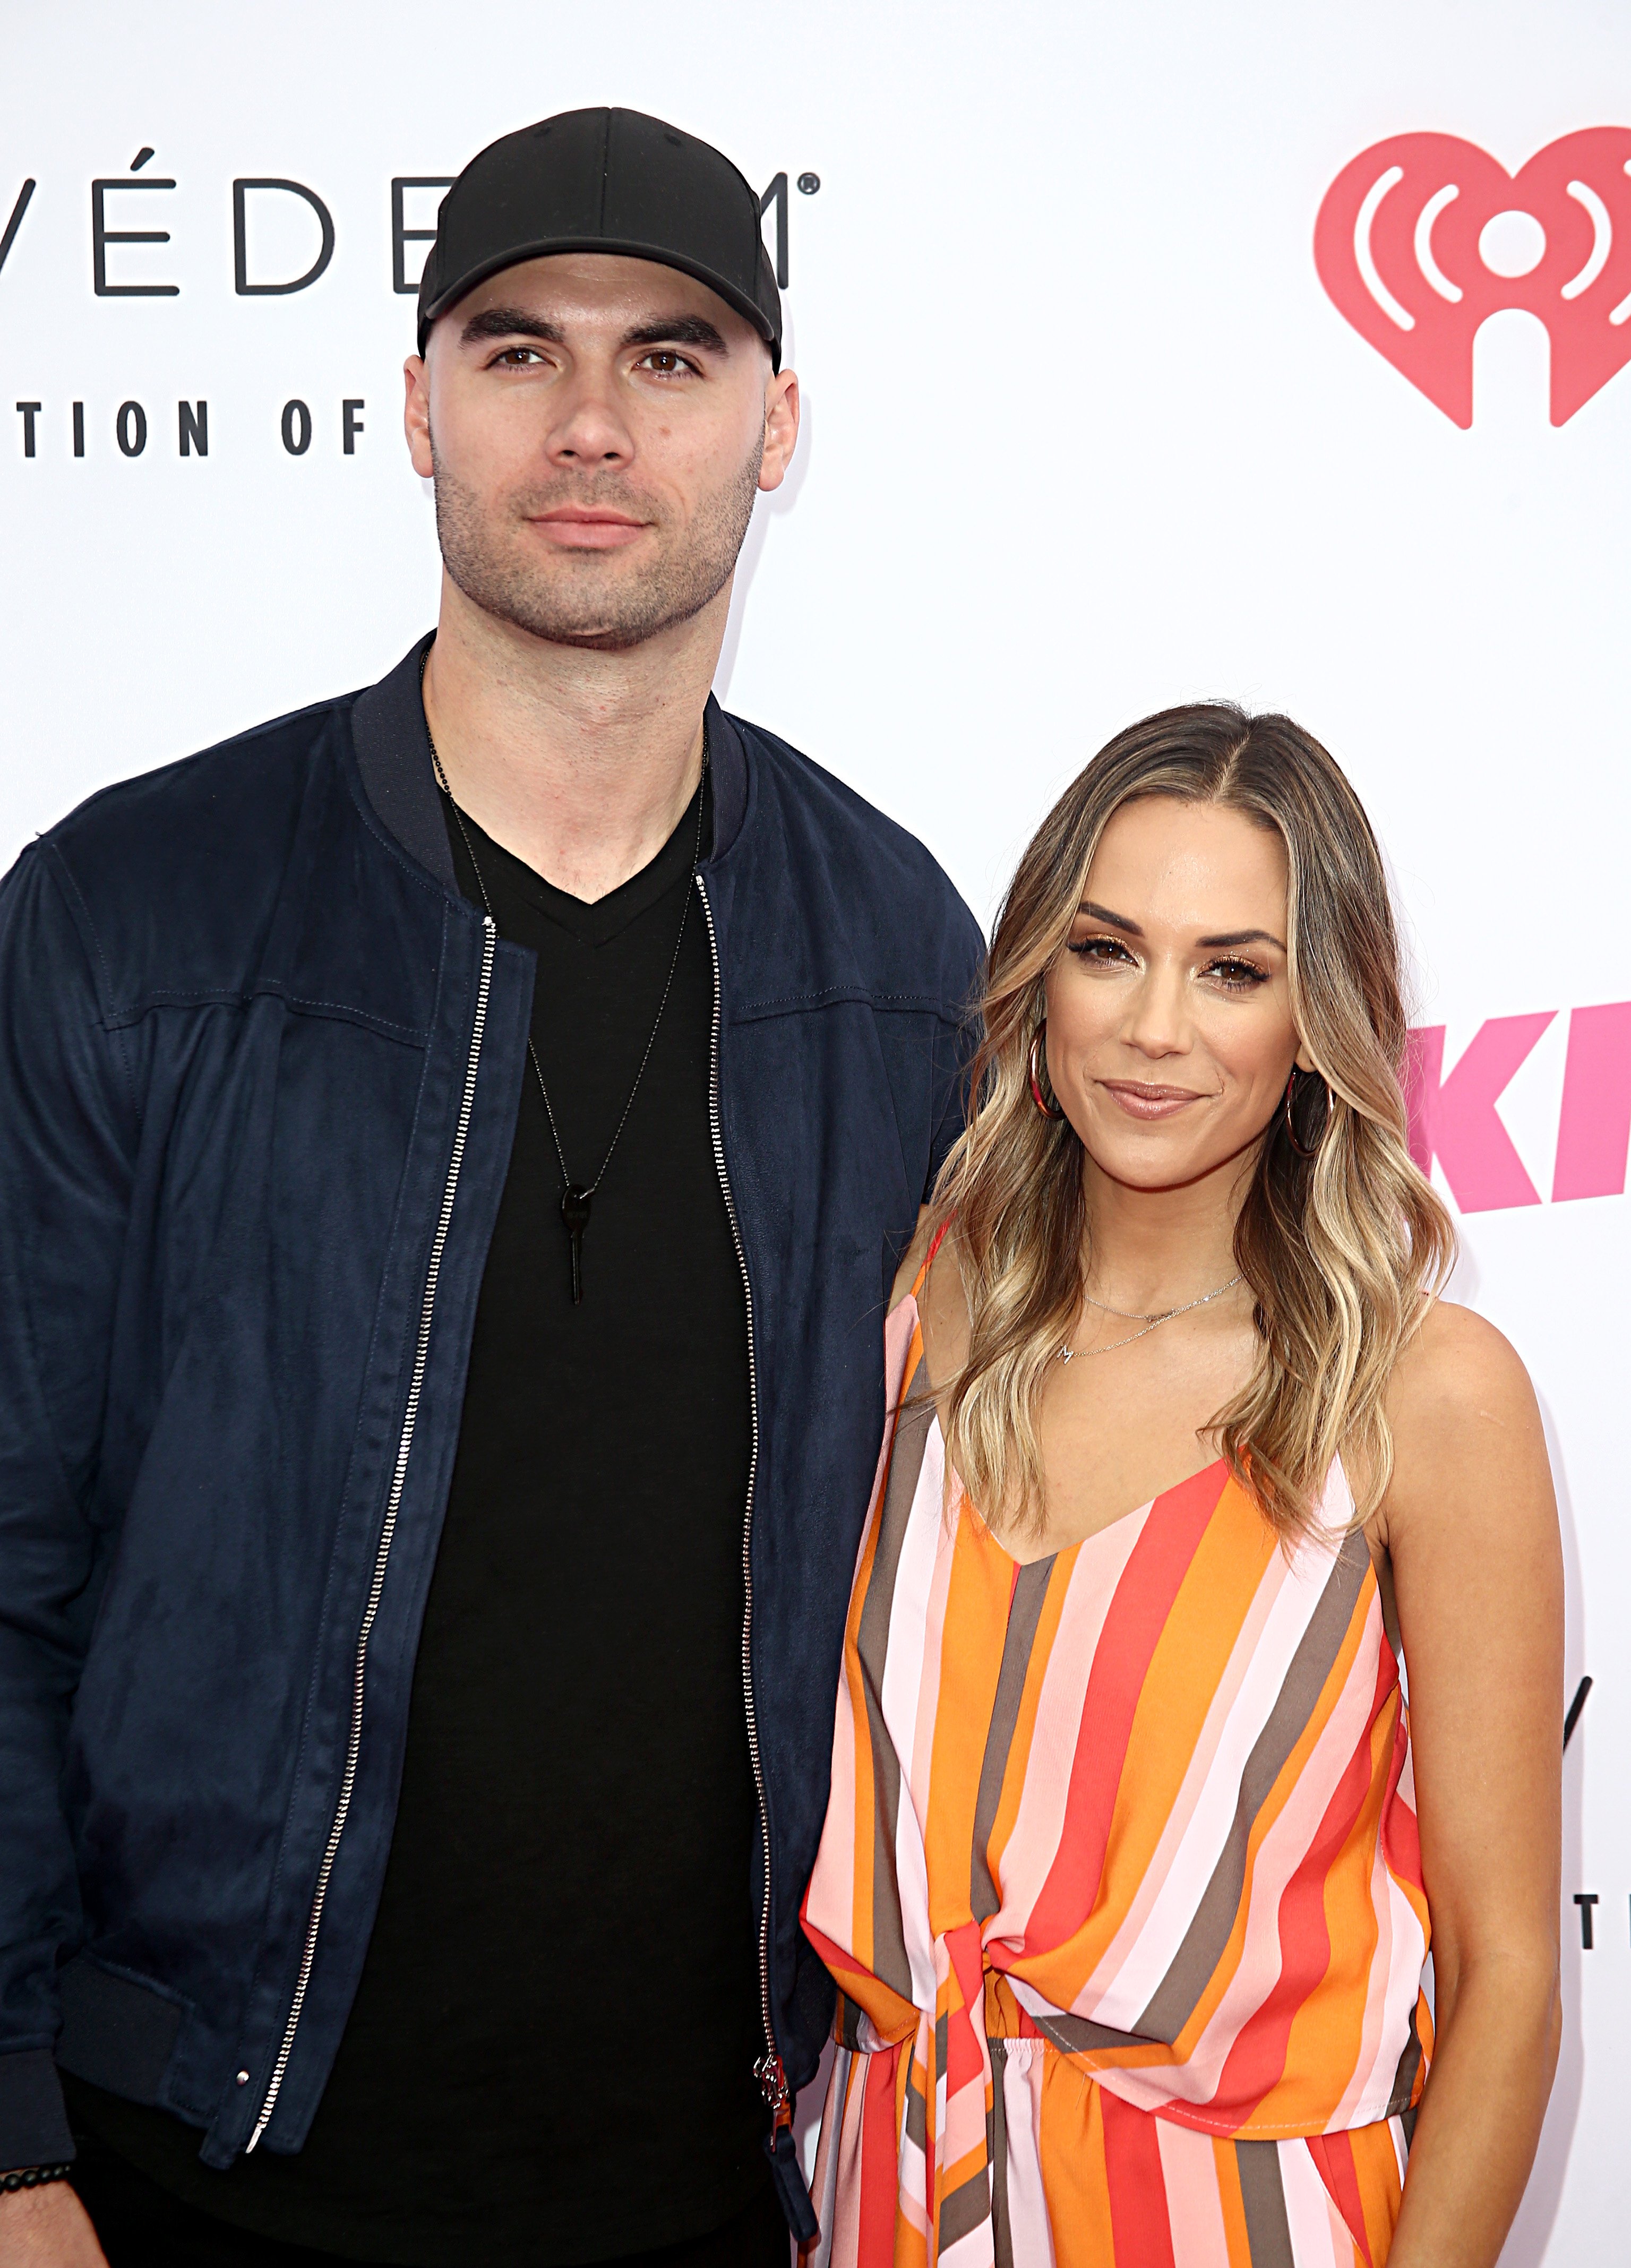 Mike Caussin and Jana Kramer at the 2019 iHeartRadio Wango Tango event in California on June 1, 2019 | Source: Getty Images